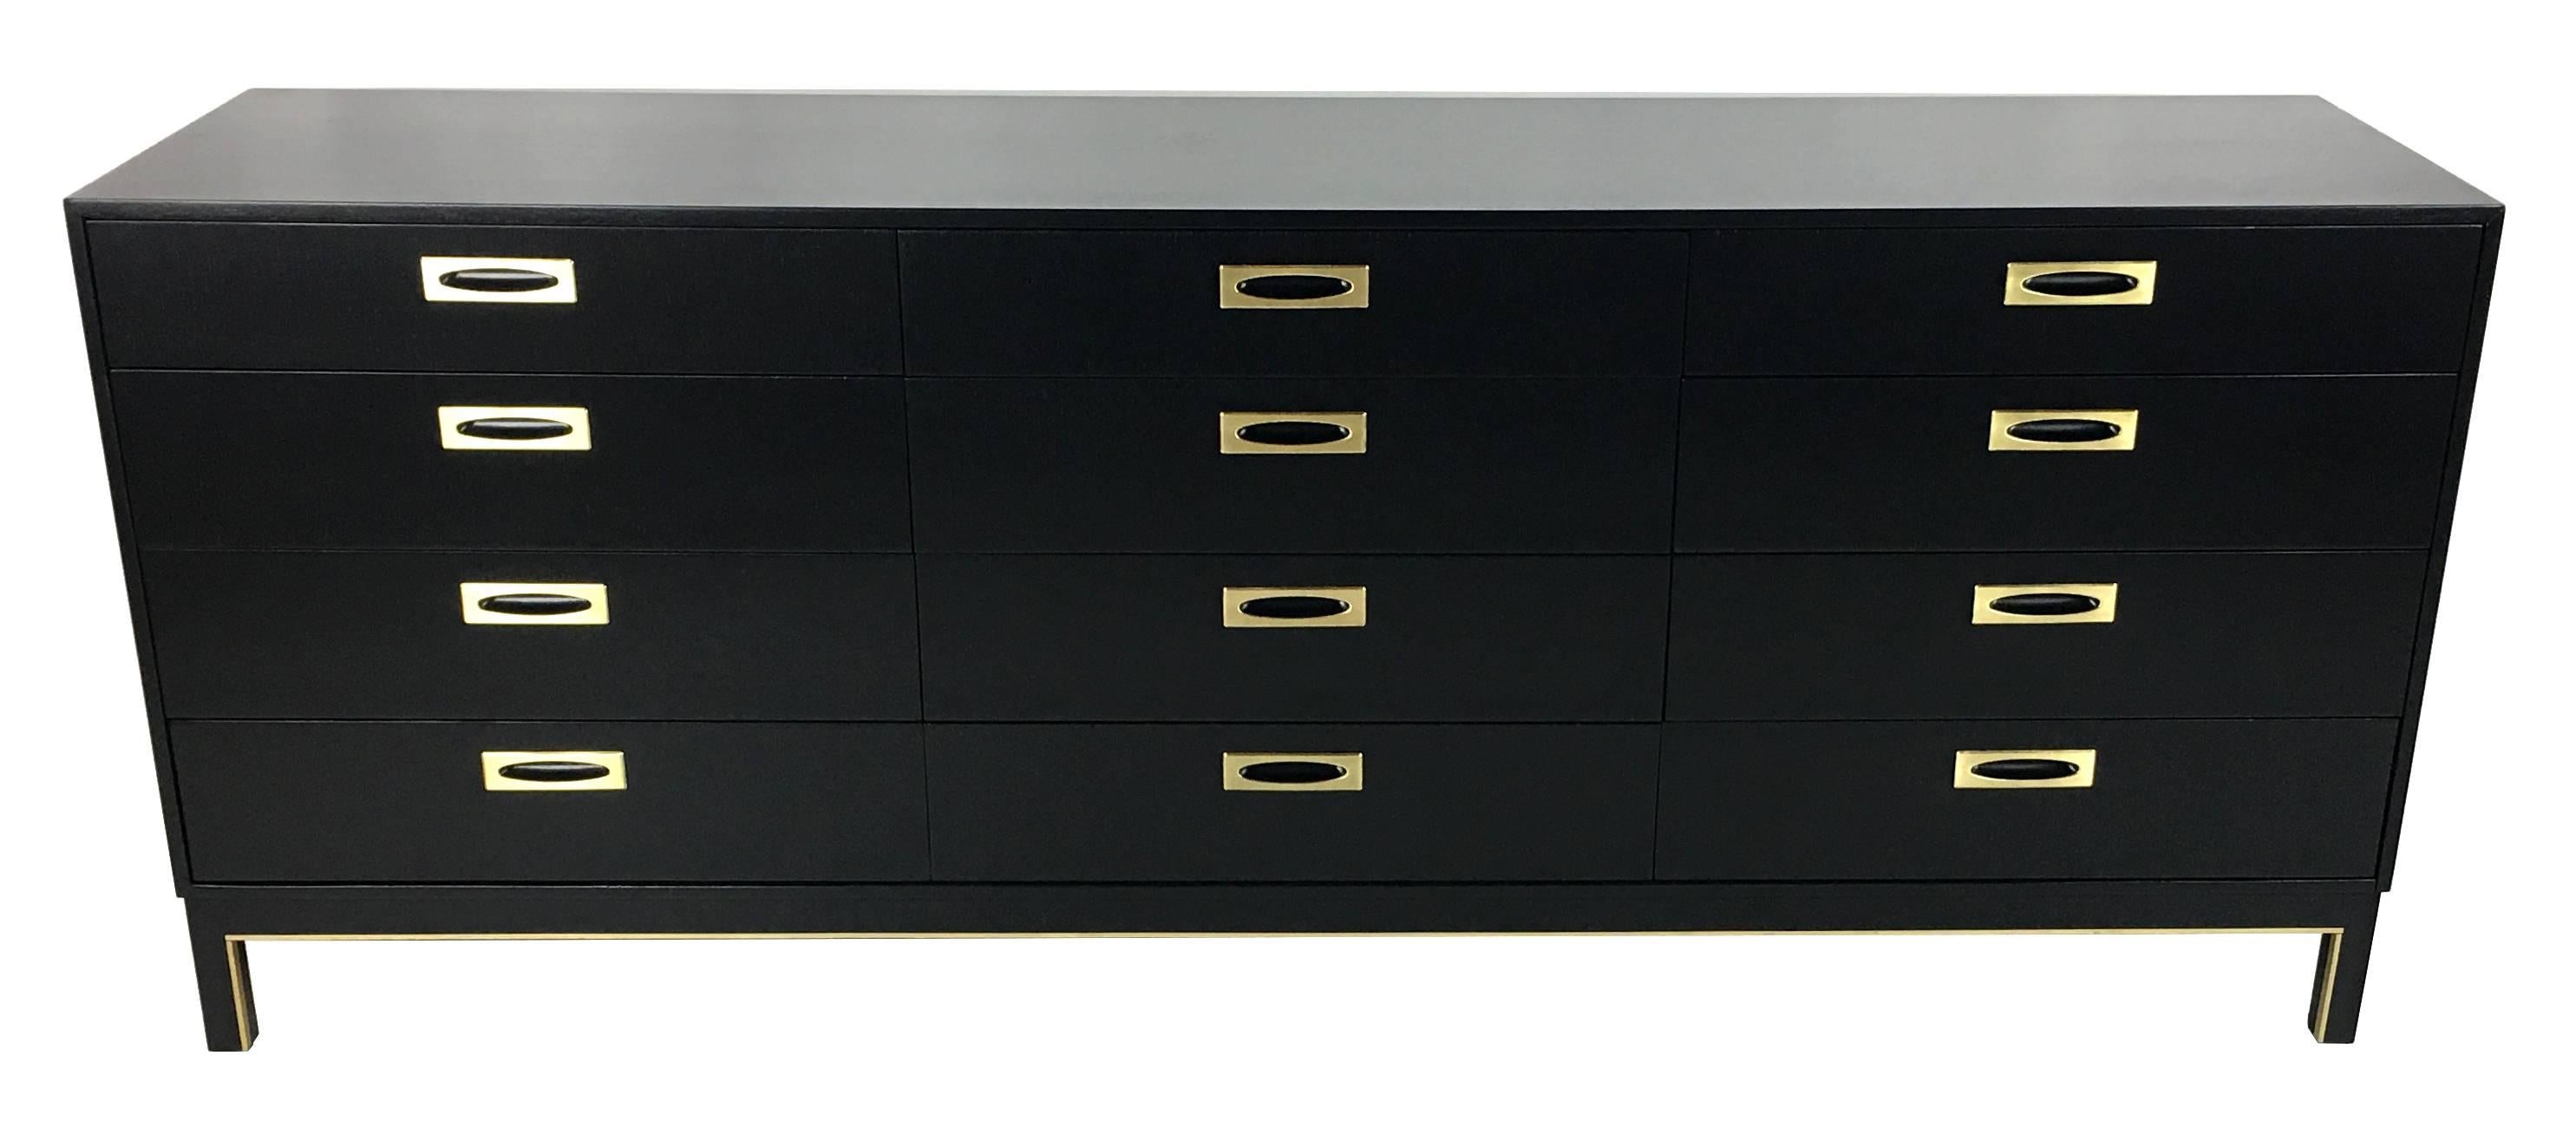 Thin-edge 12-drawer dresser with flush brass finger pulls and brass trimmed base. The dresser has been painstakingly refinished along with the brass mounts, which have been done in a light brushed finish and clear-lacquered. Finest quality materials